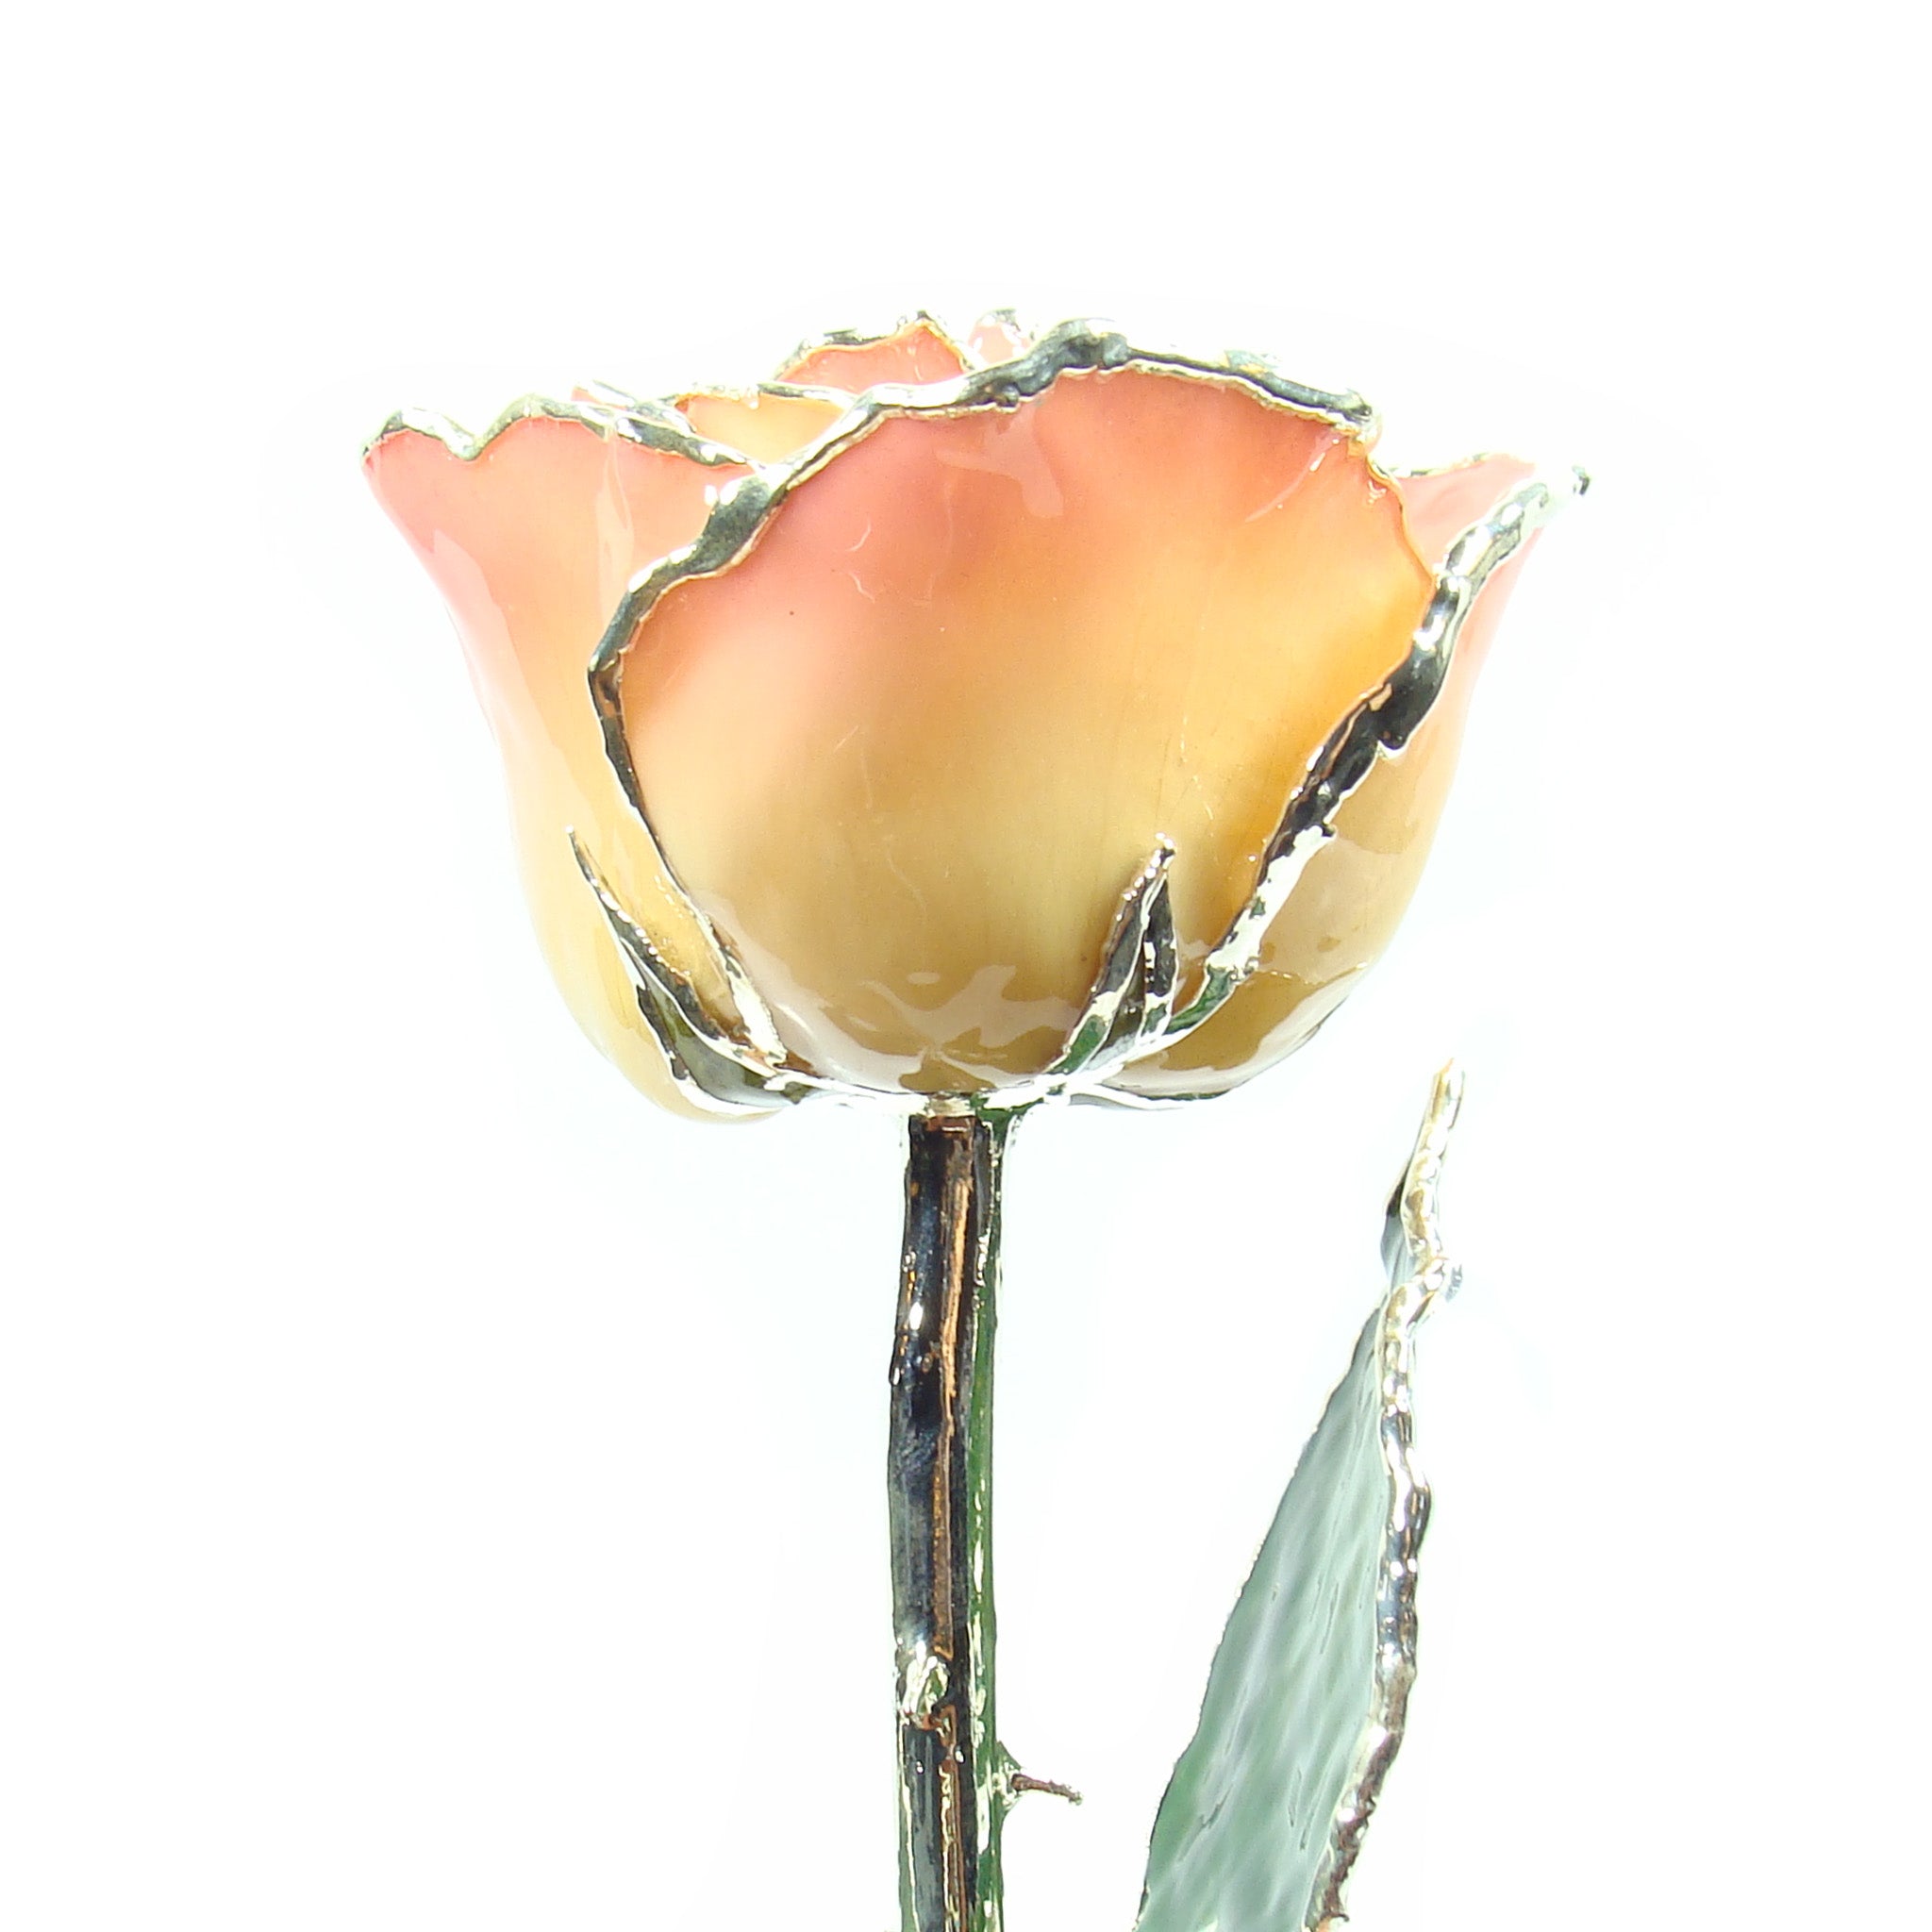 Silver Trimmed Forever Rose with White to Pink Petals. View of Stem, Leaves, and Rose Petals and Showing Detail of Silver Trim